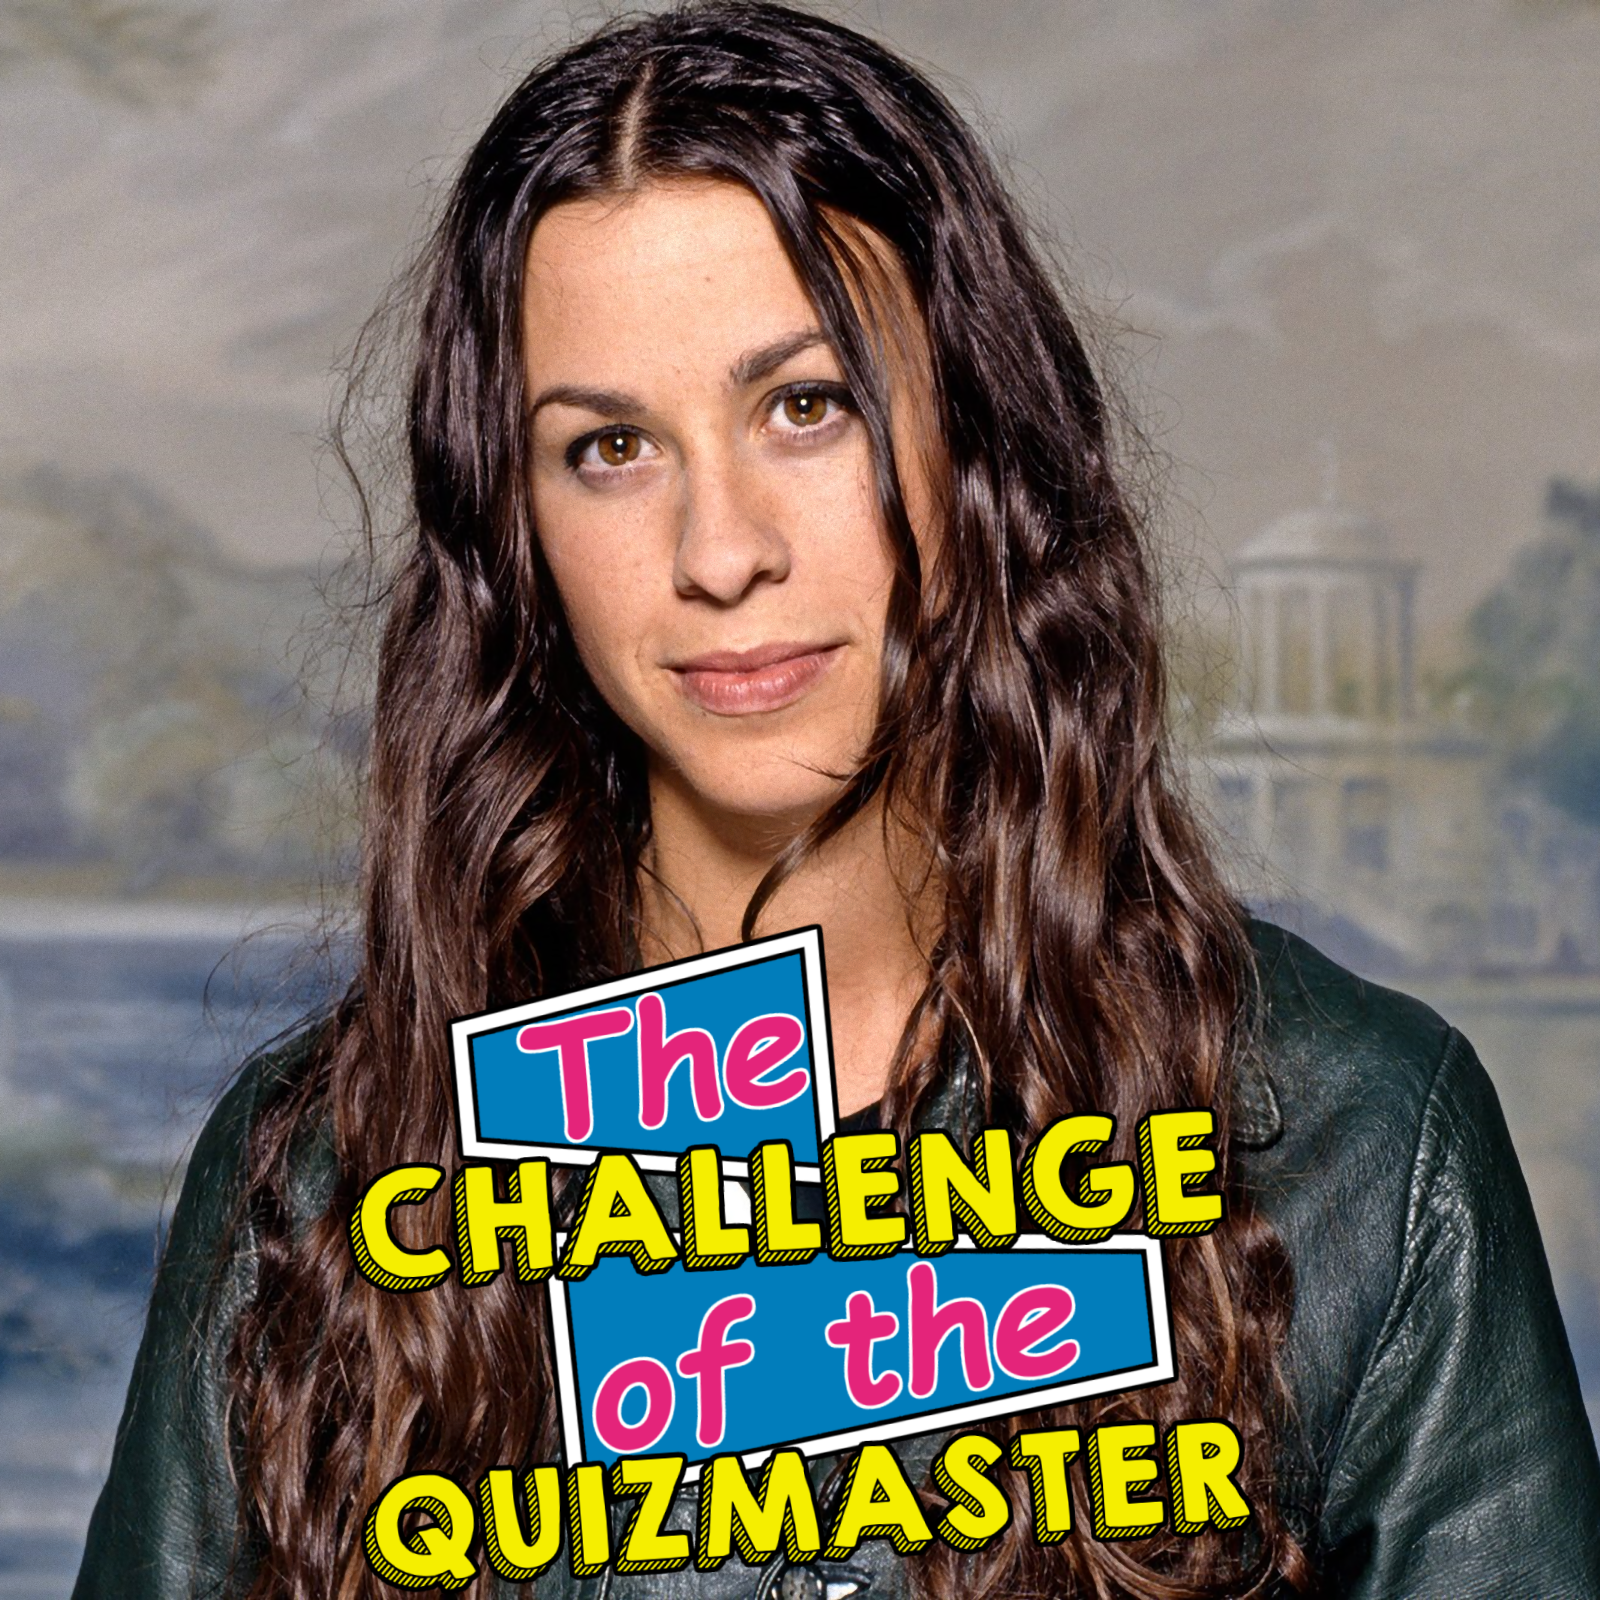 Which Version Of Alanis Morissette Are You? - The Challenge of the Quizmaster